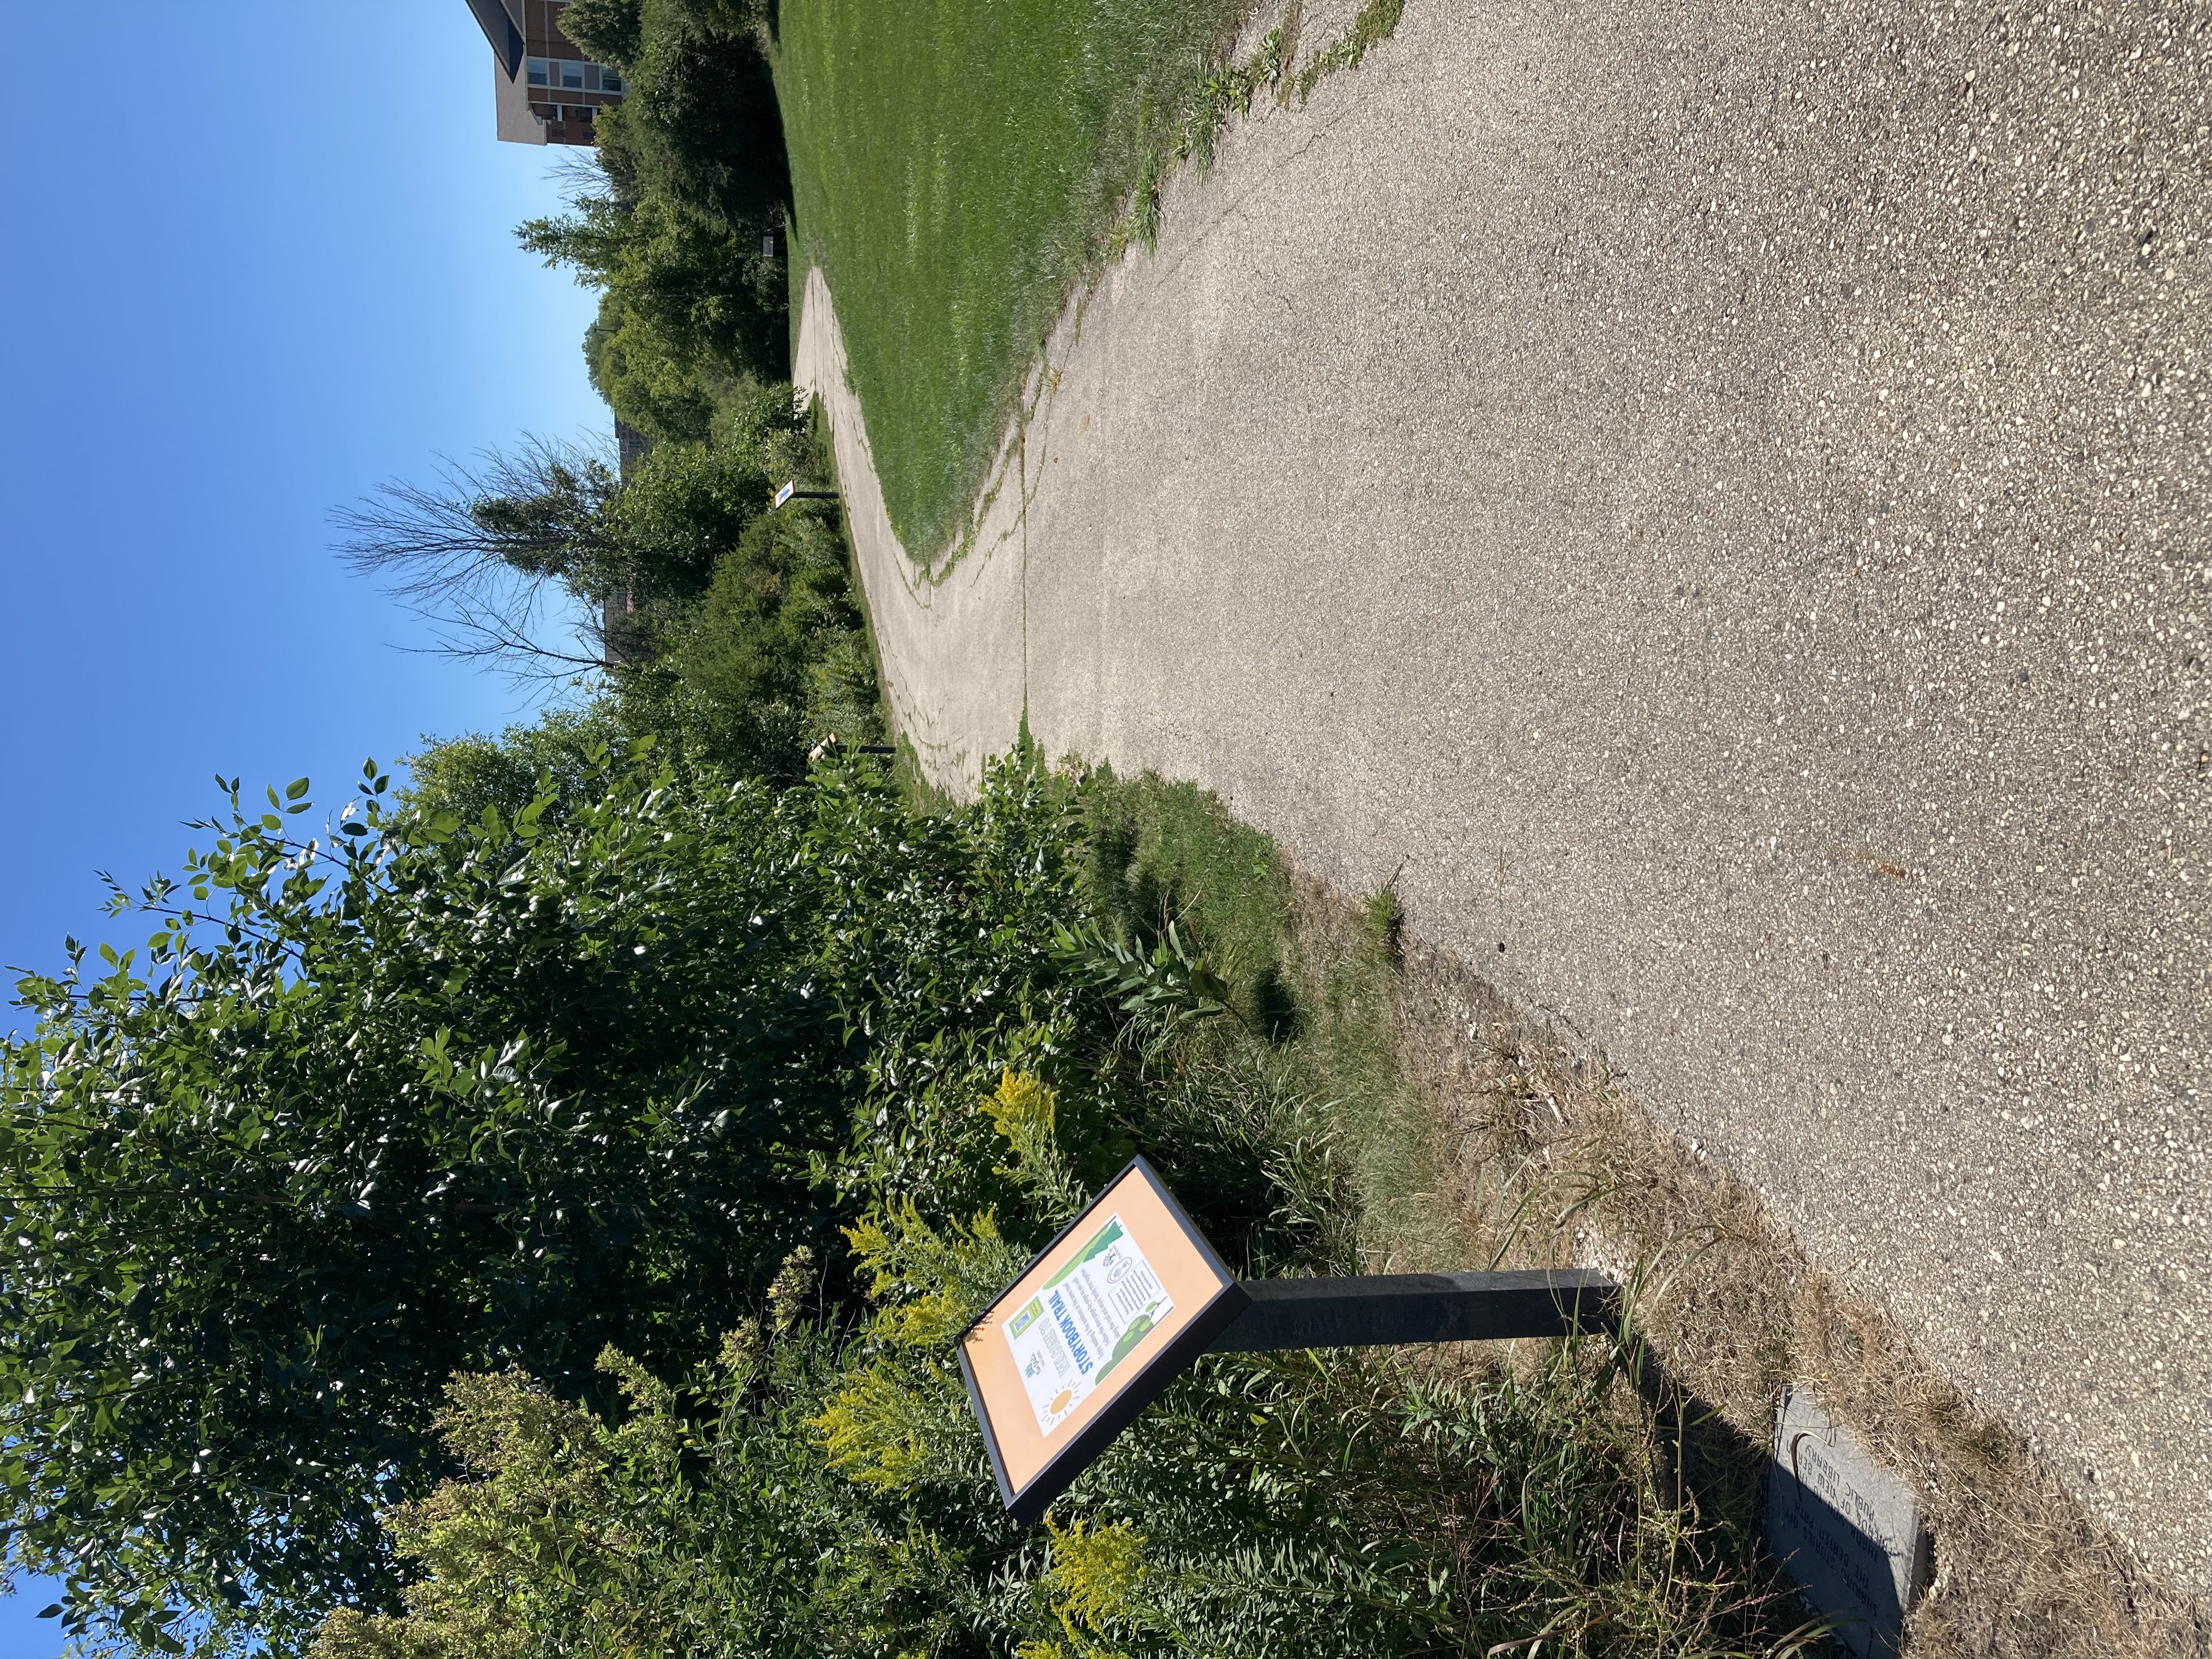 Walking trail with story signs